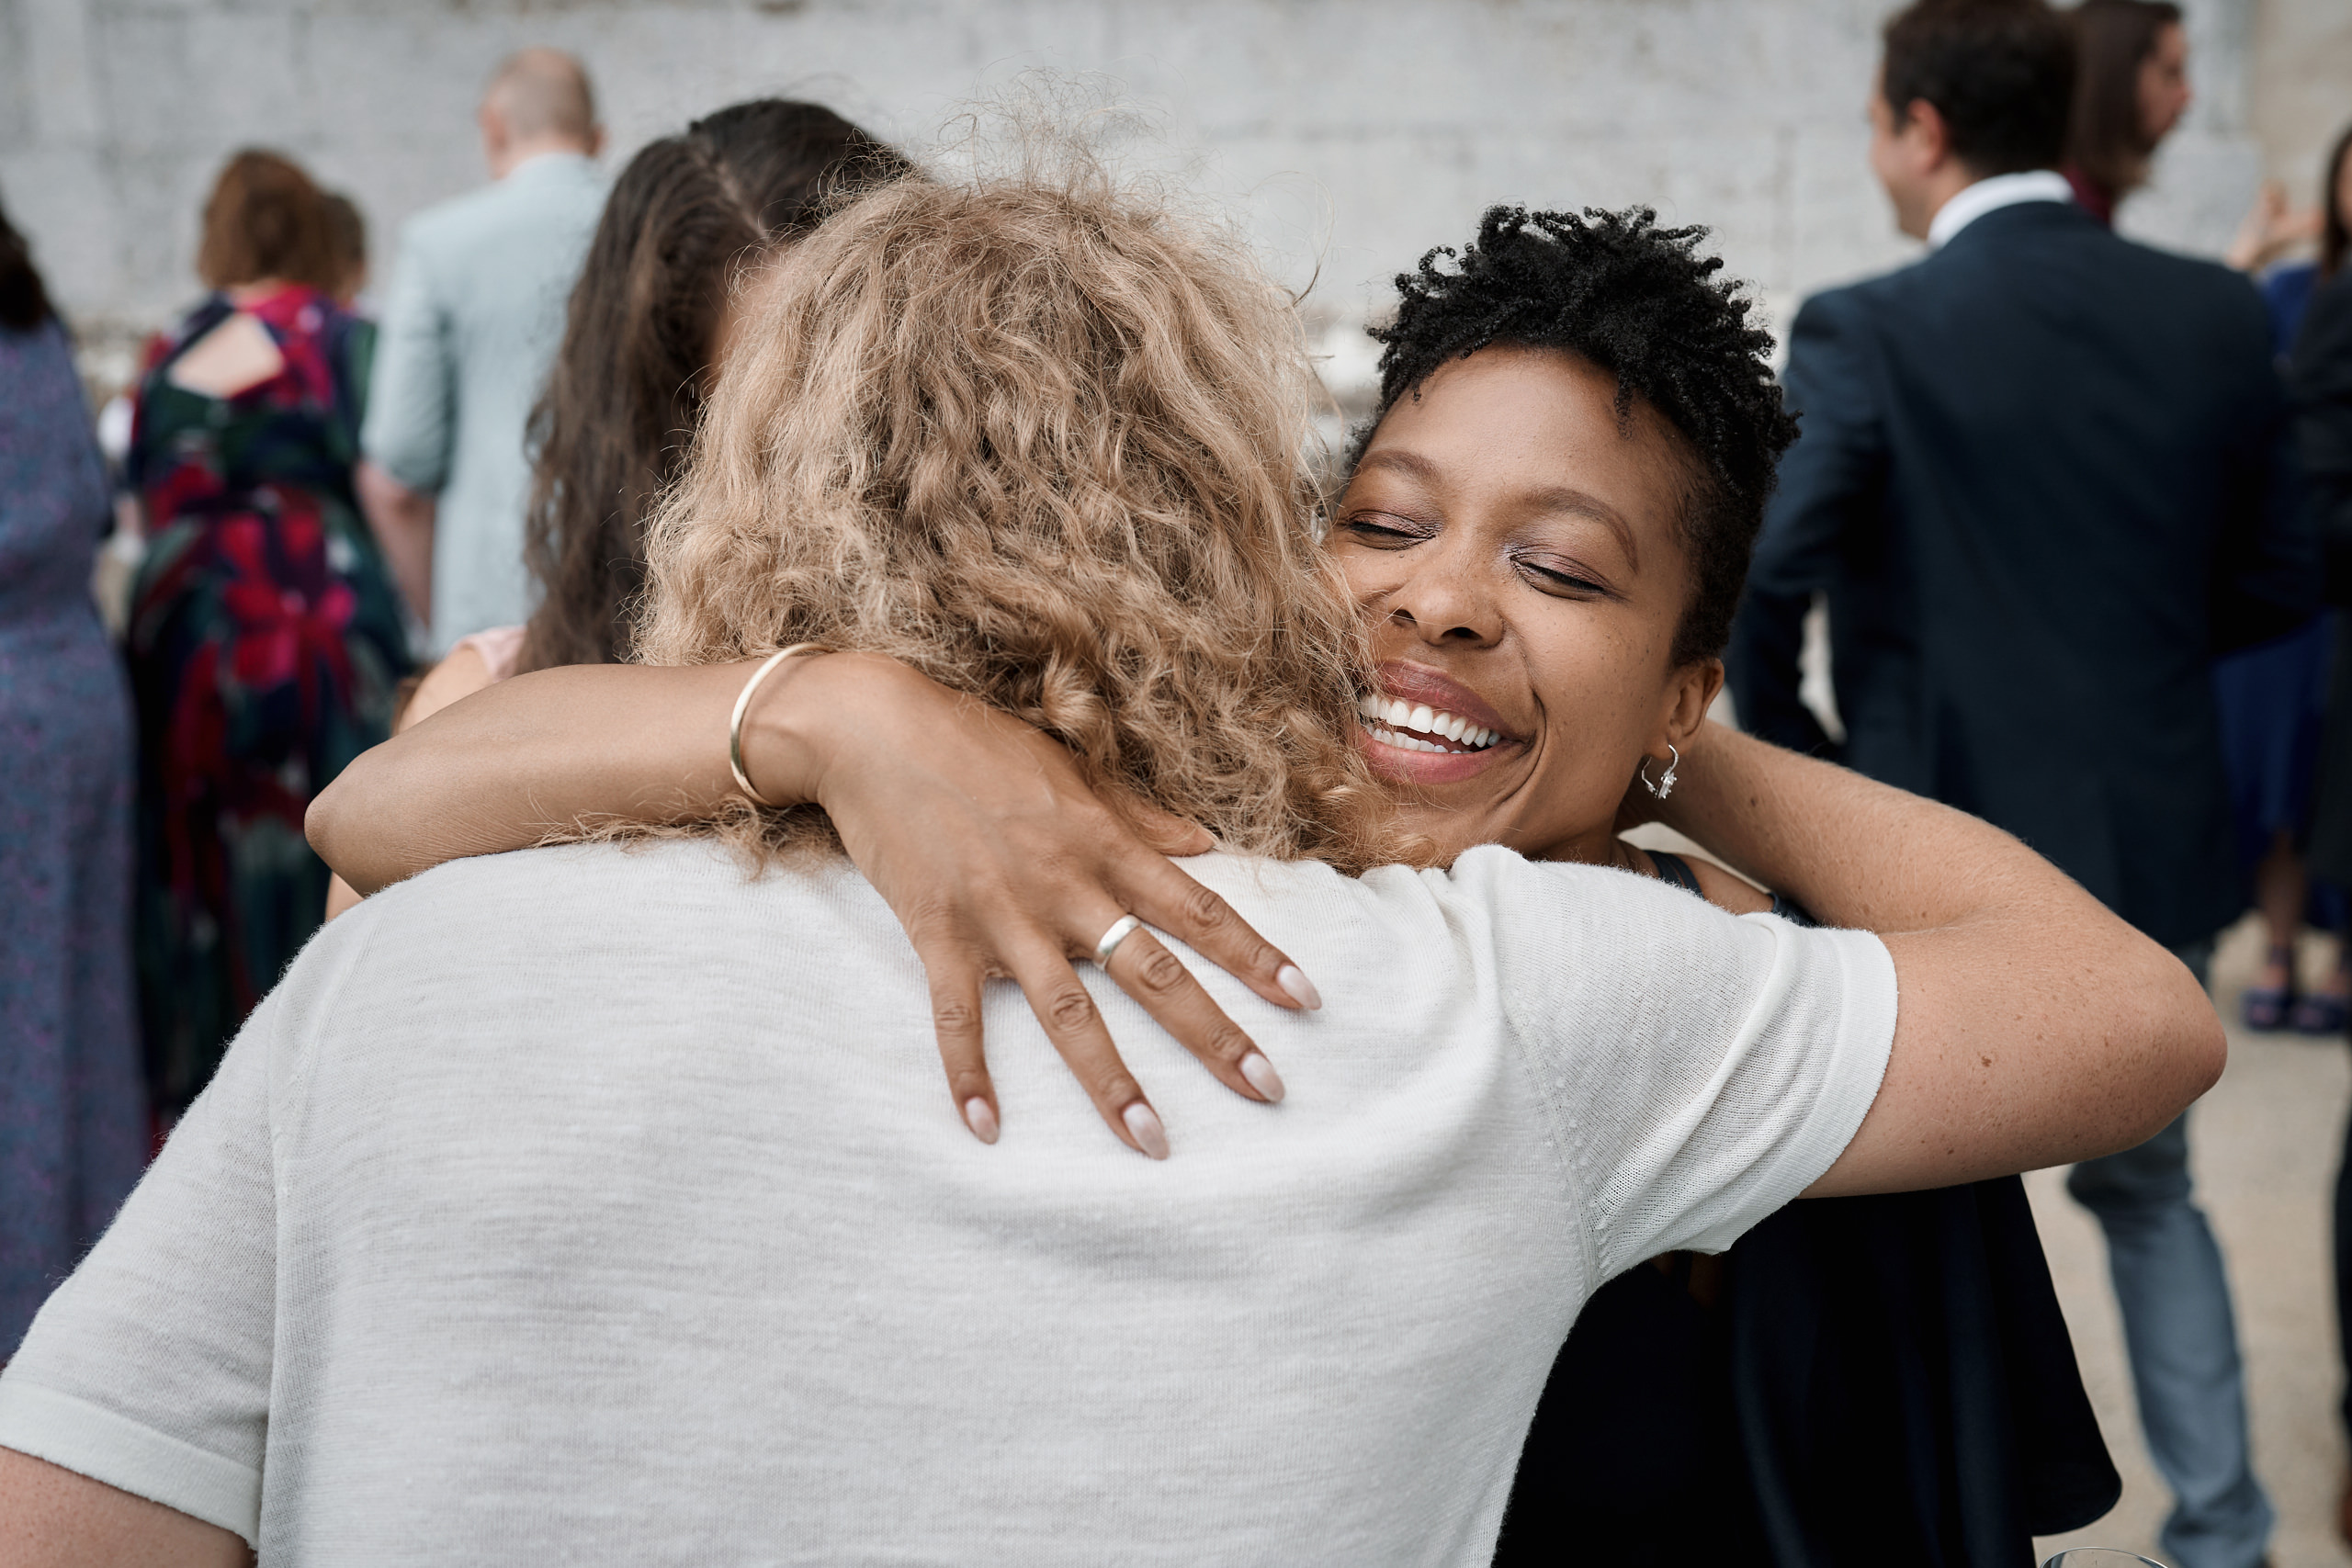 A lady is giving another lady a hug at some gathering.